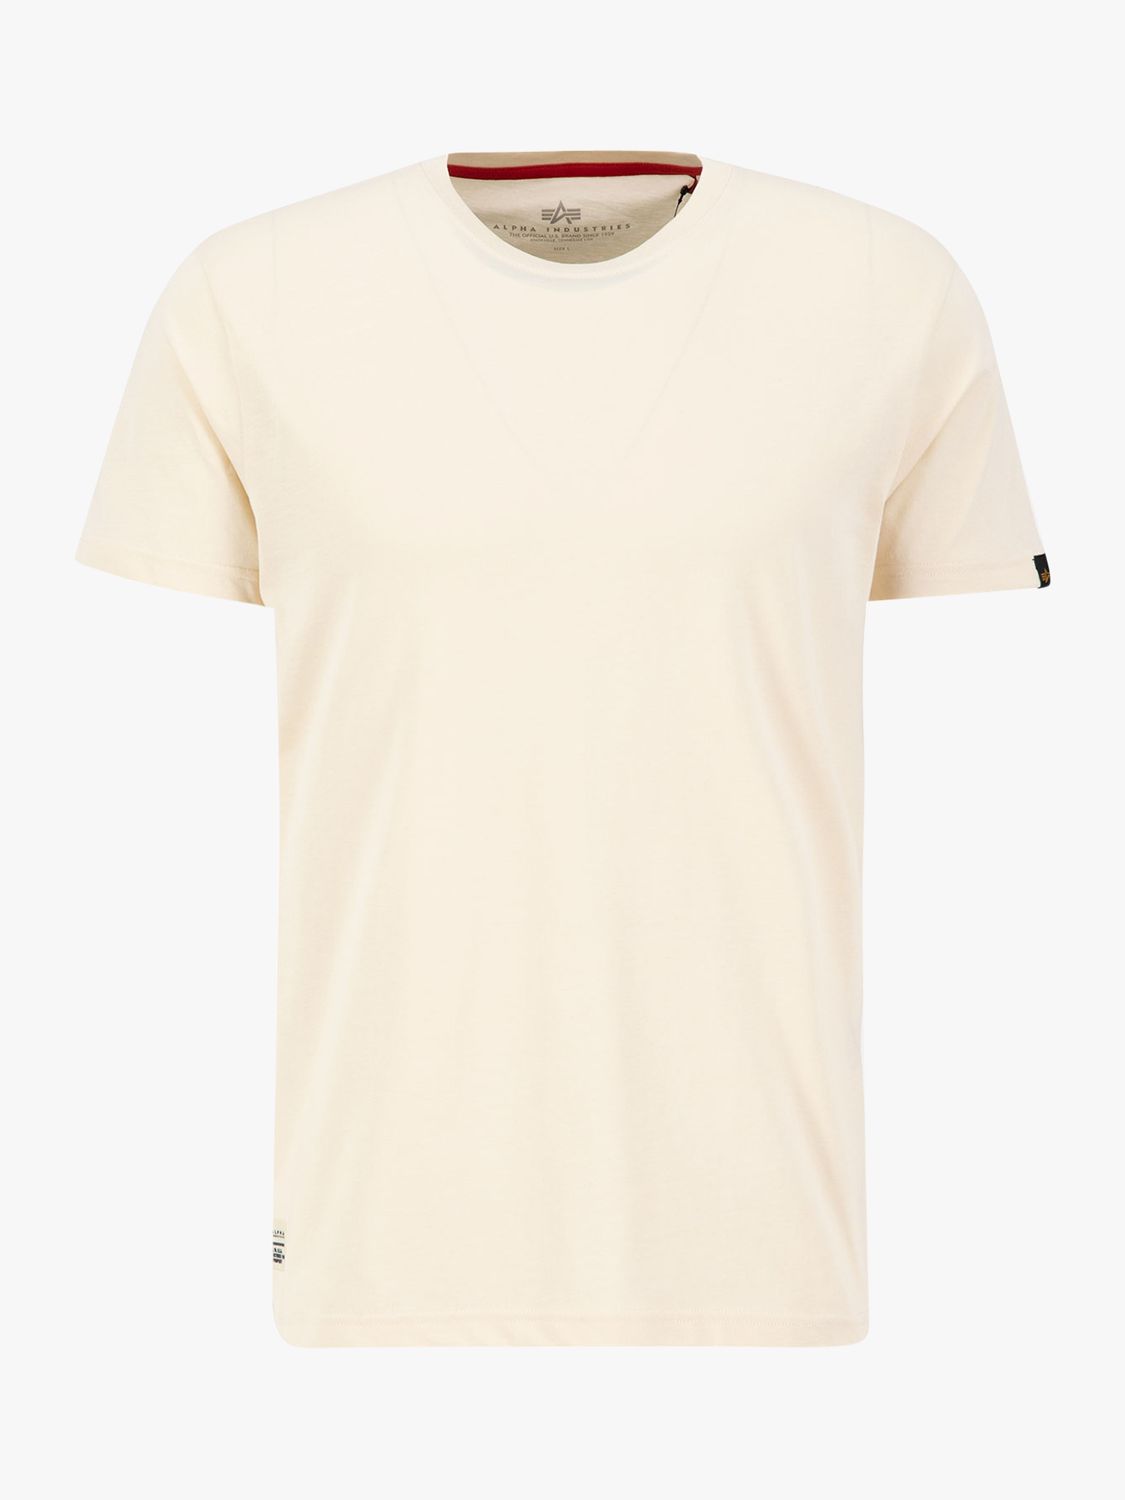 Alpha Industries USN Blood Chit T-Shirt, White, S